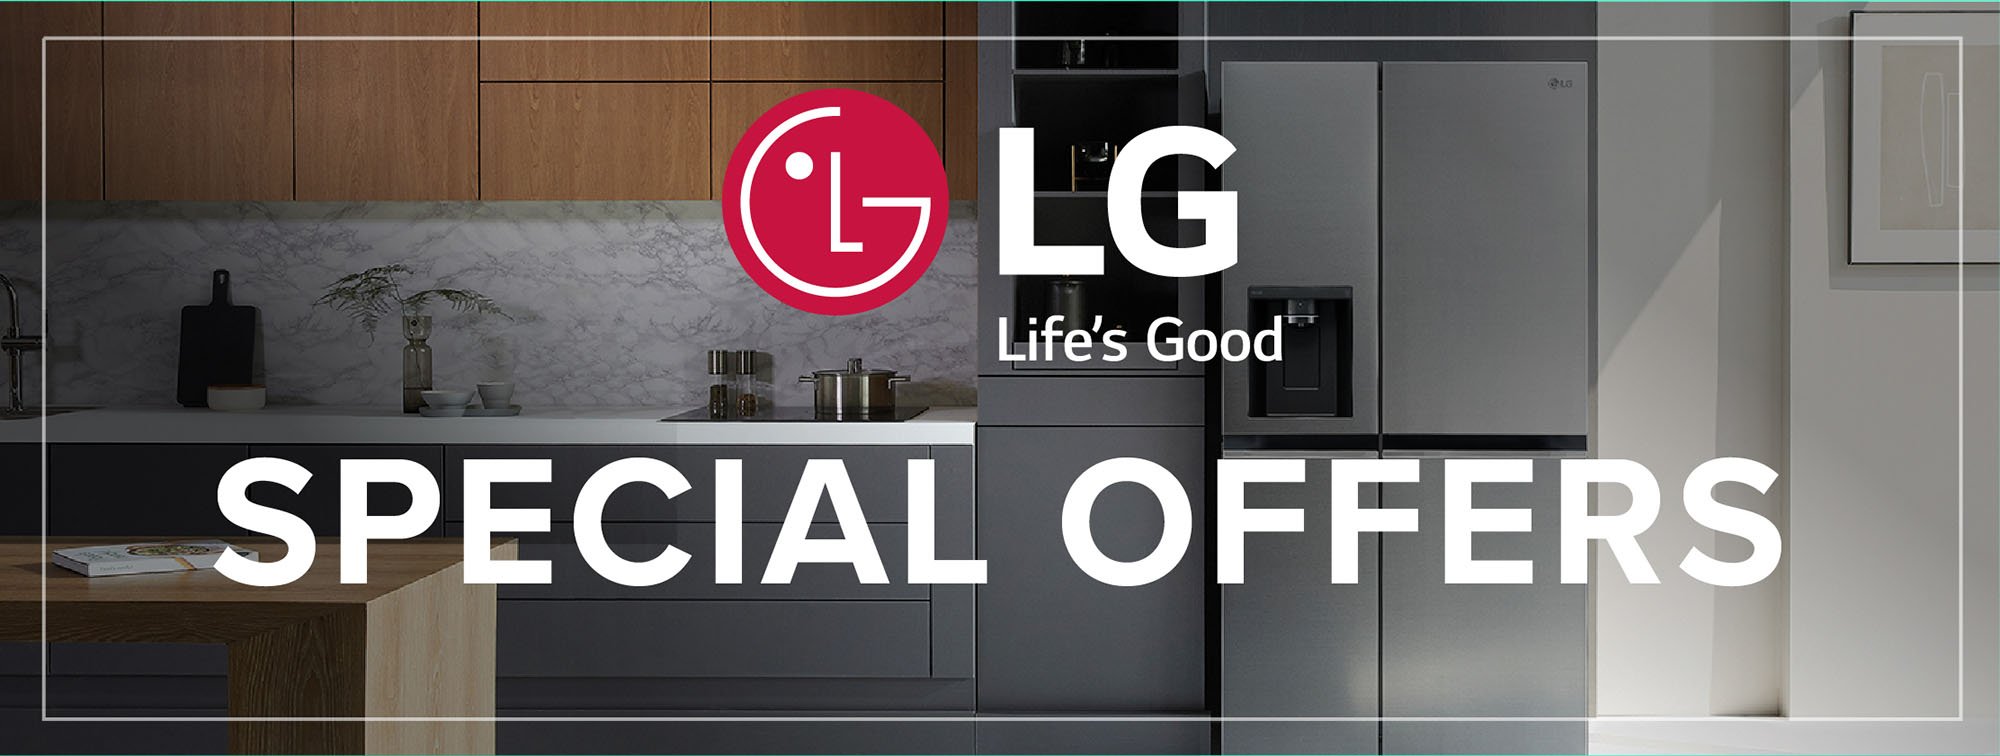 LG 4 Special Offers - Offer ends 07.03.23